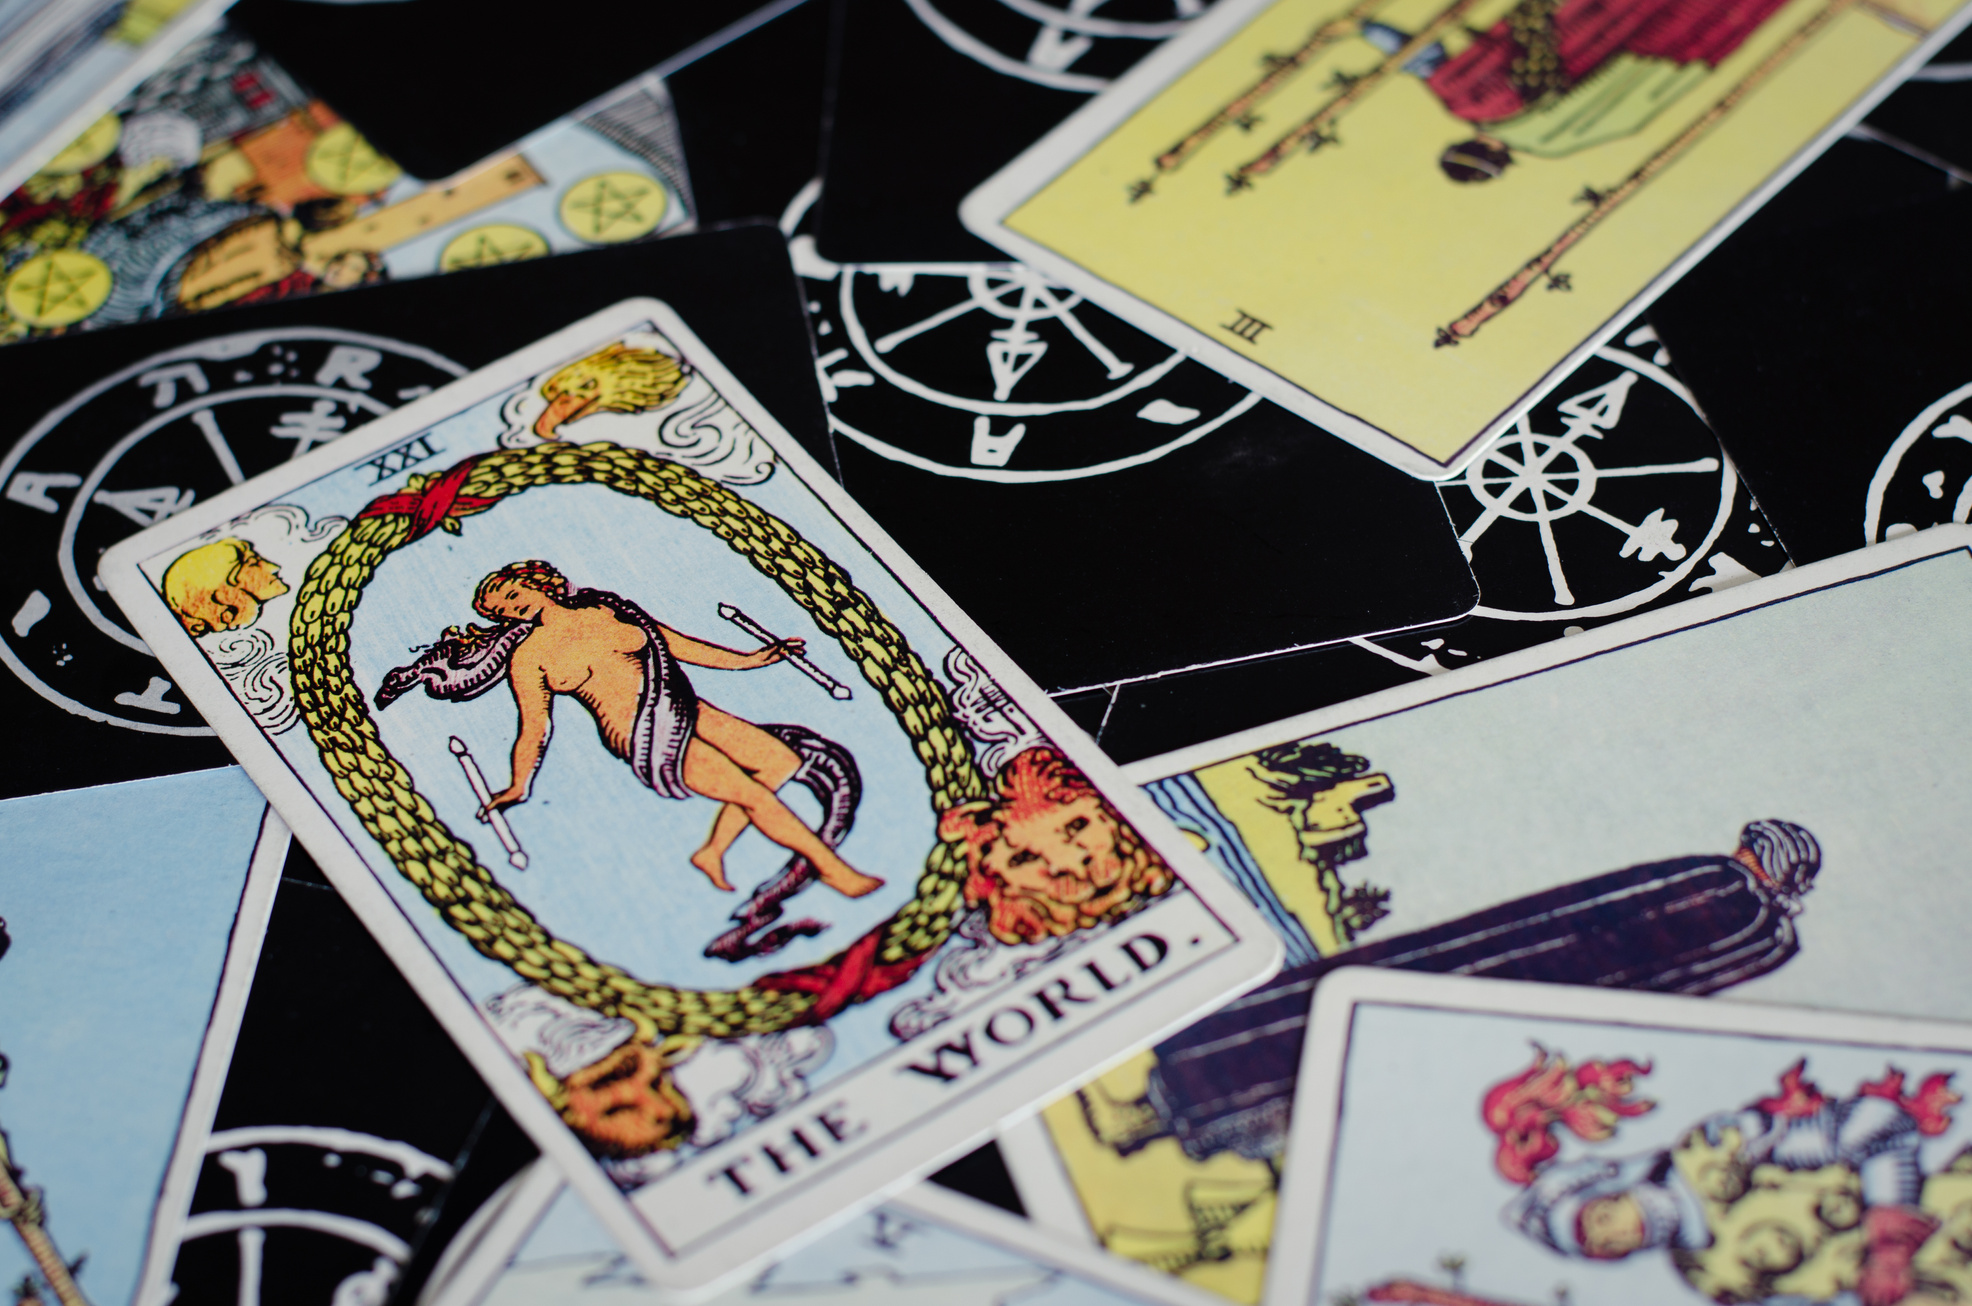 The World Card and Other Cards of the Tarot Cards.